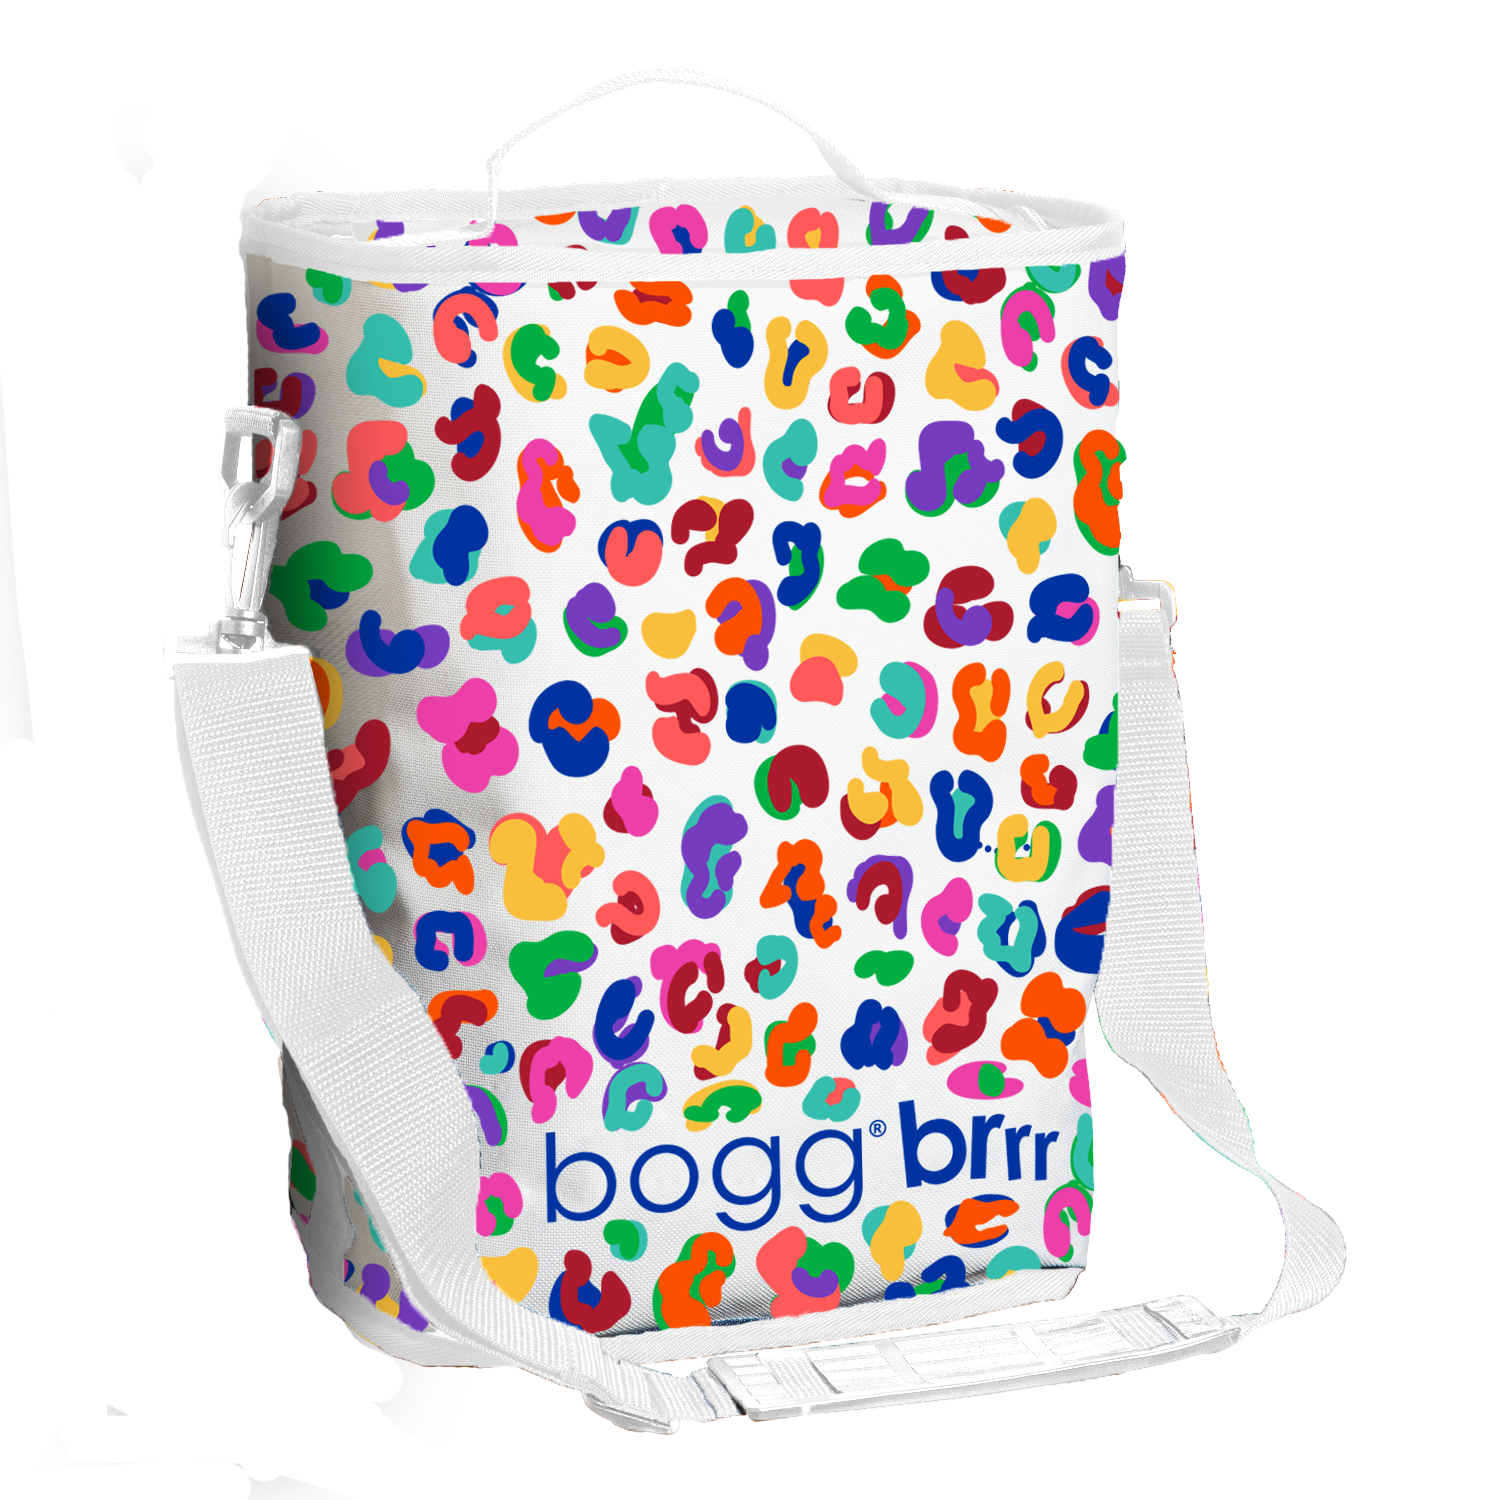 ☘☘☘ "The Original Baby Bogg Bag" Leopard Pink Tote Limited  Edition☘☘☘